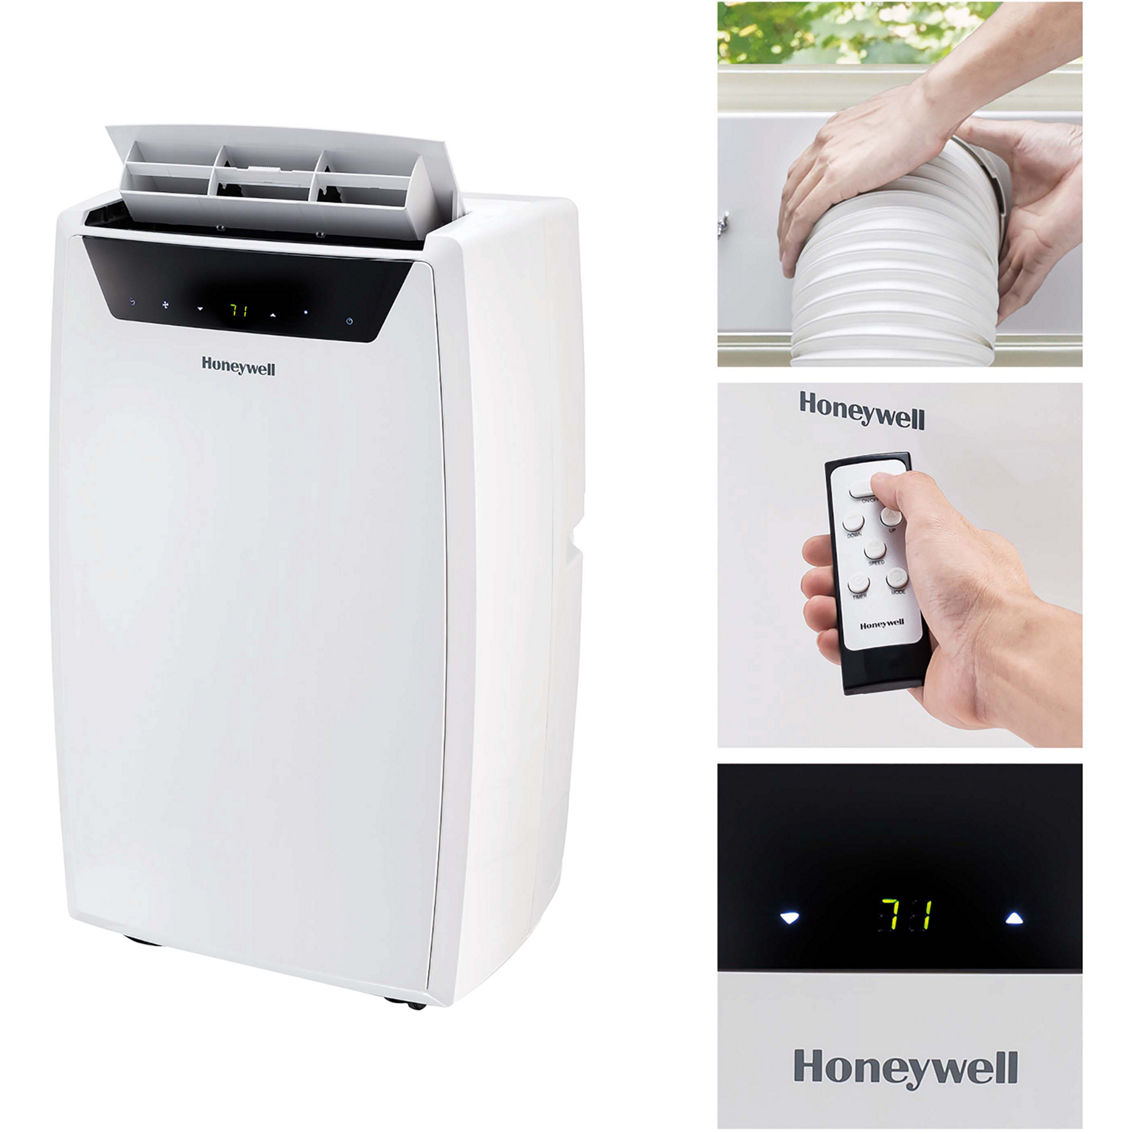 Honeywell 14,000 BTU Portable Air Conditioner, Dehumidifier and Fan - Image 2 of 6